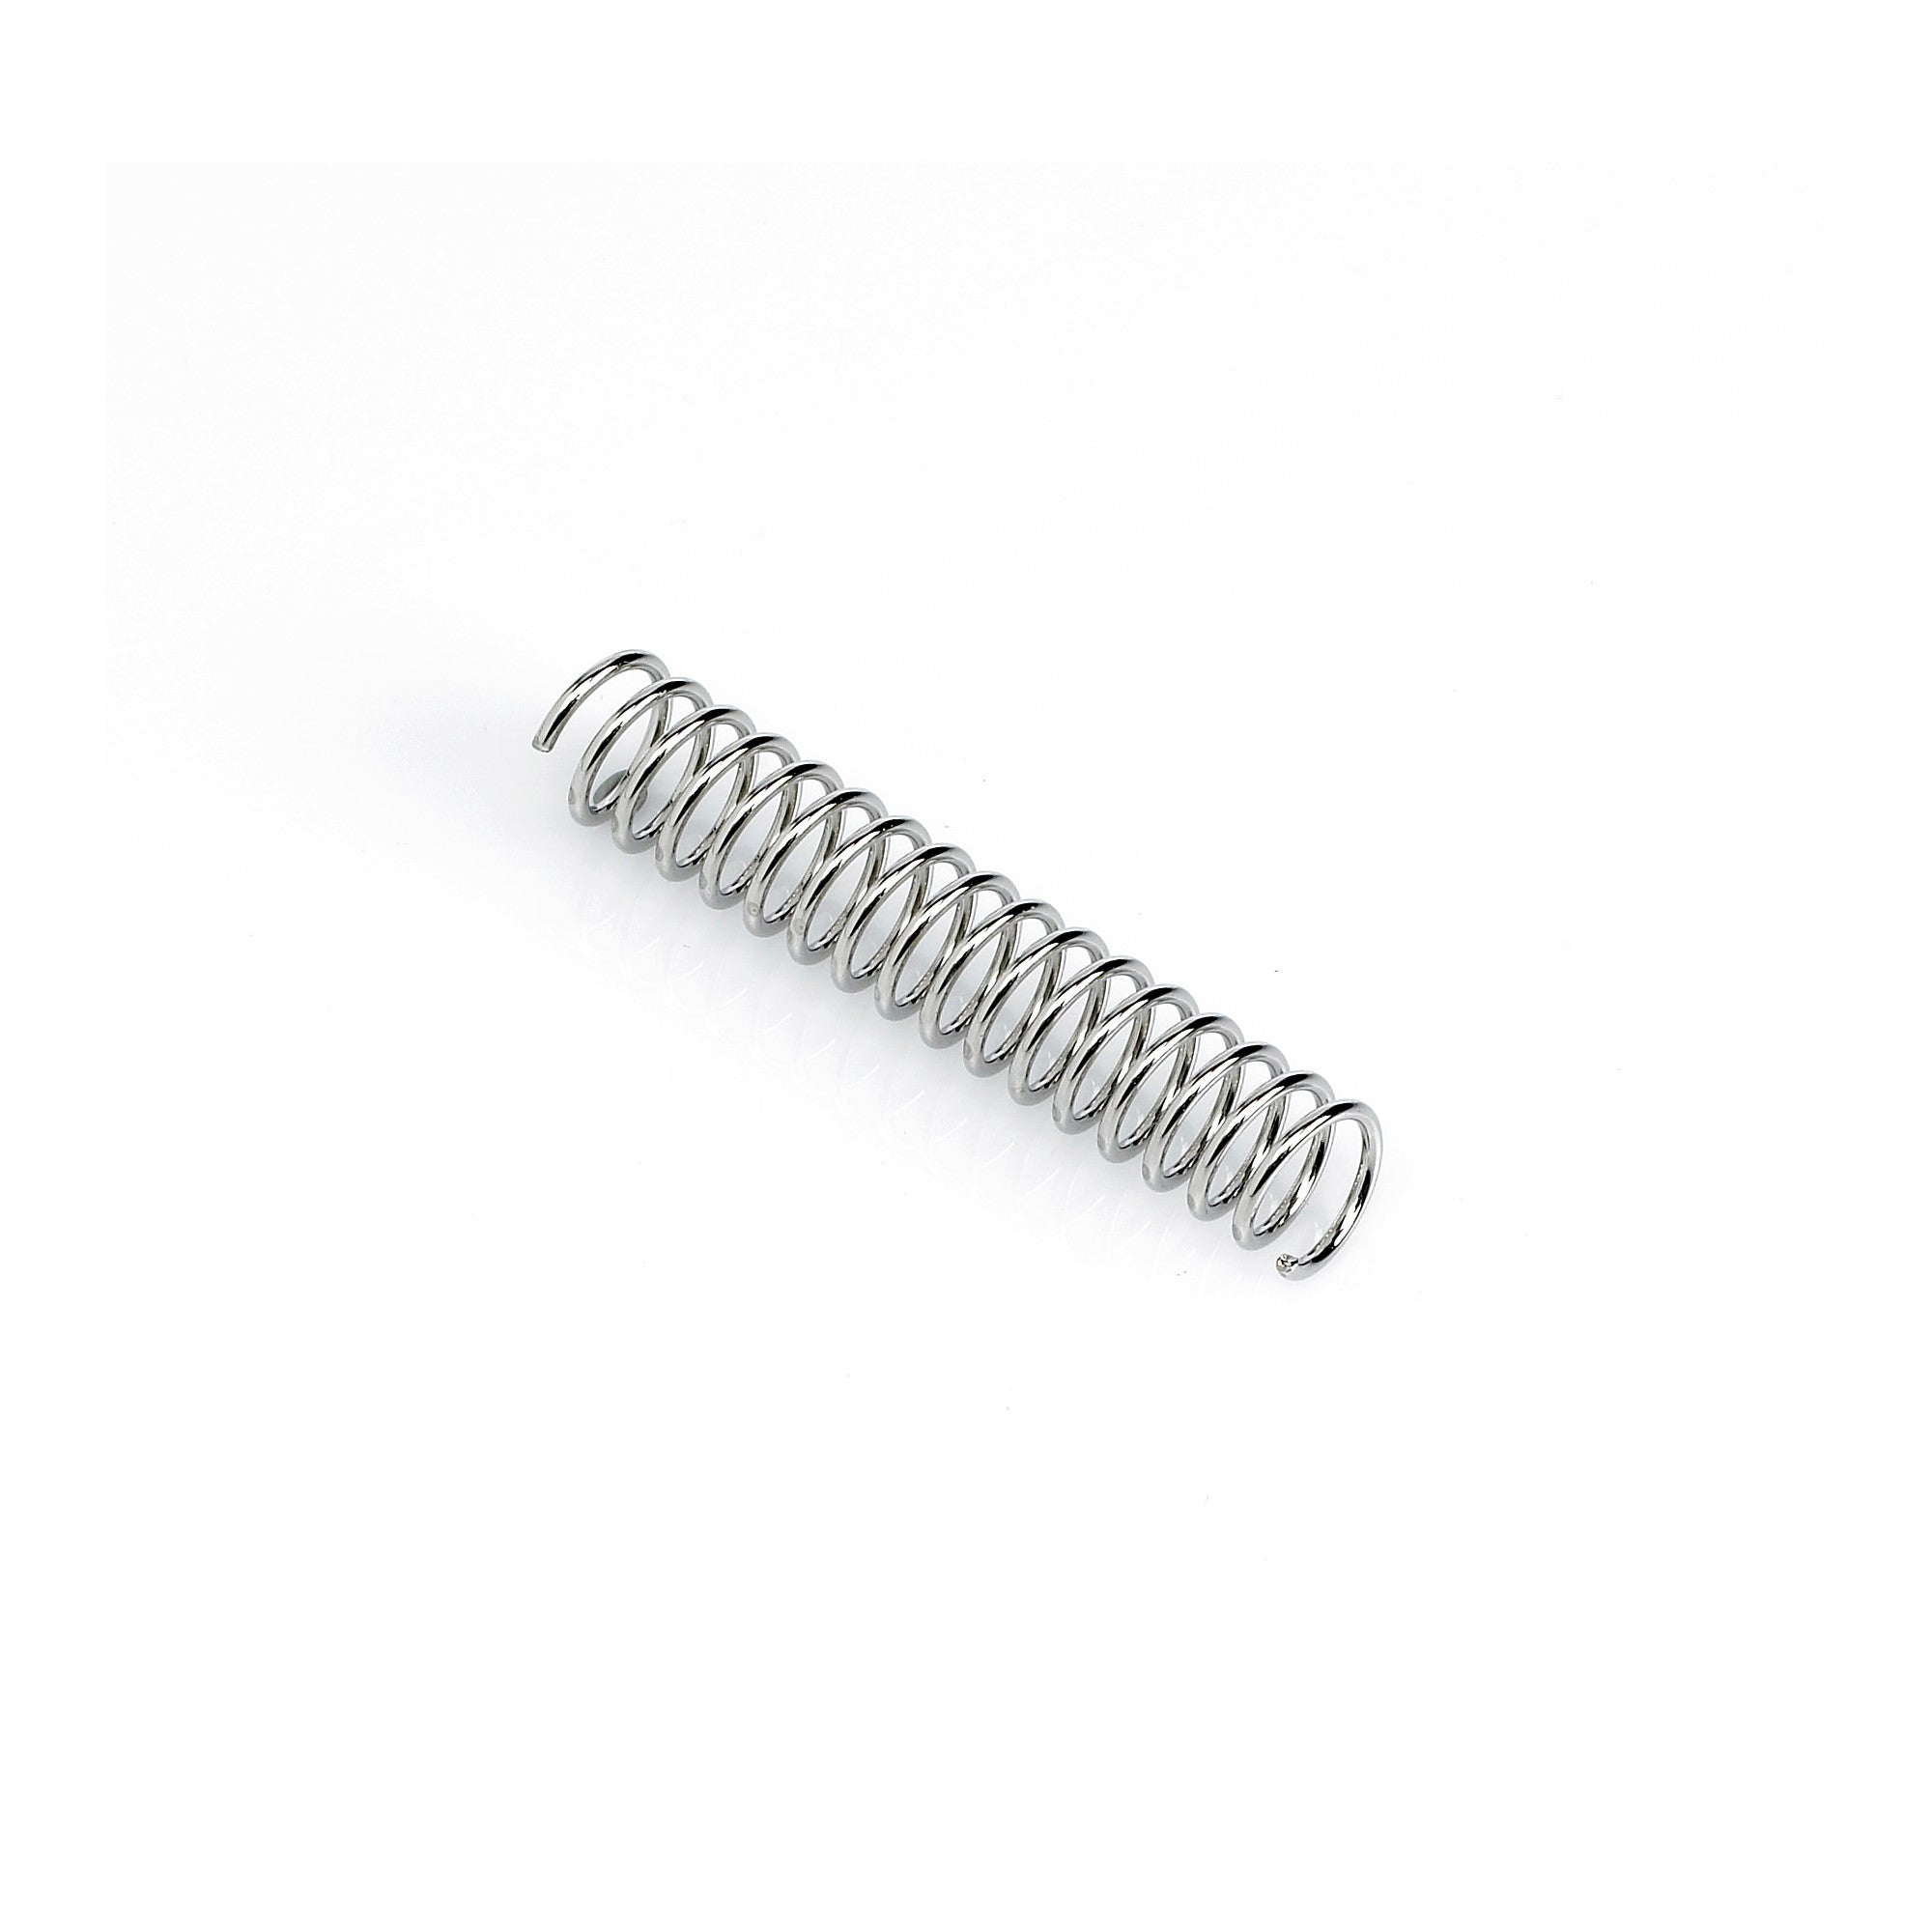 Replacement Spring for Bypass Pruner